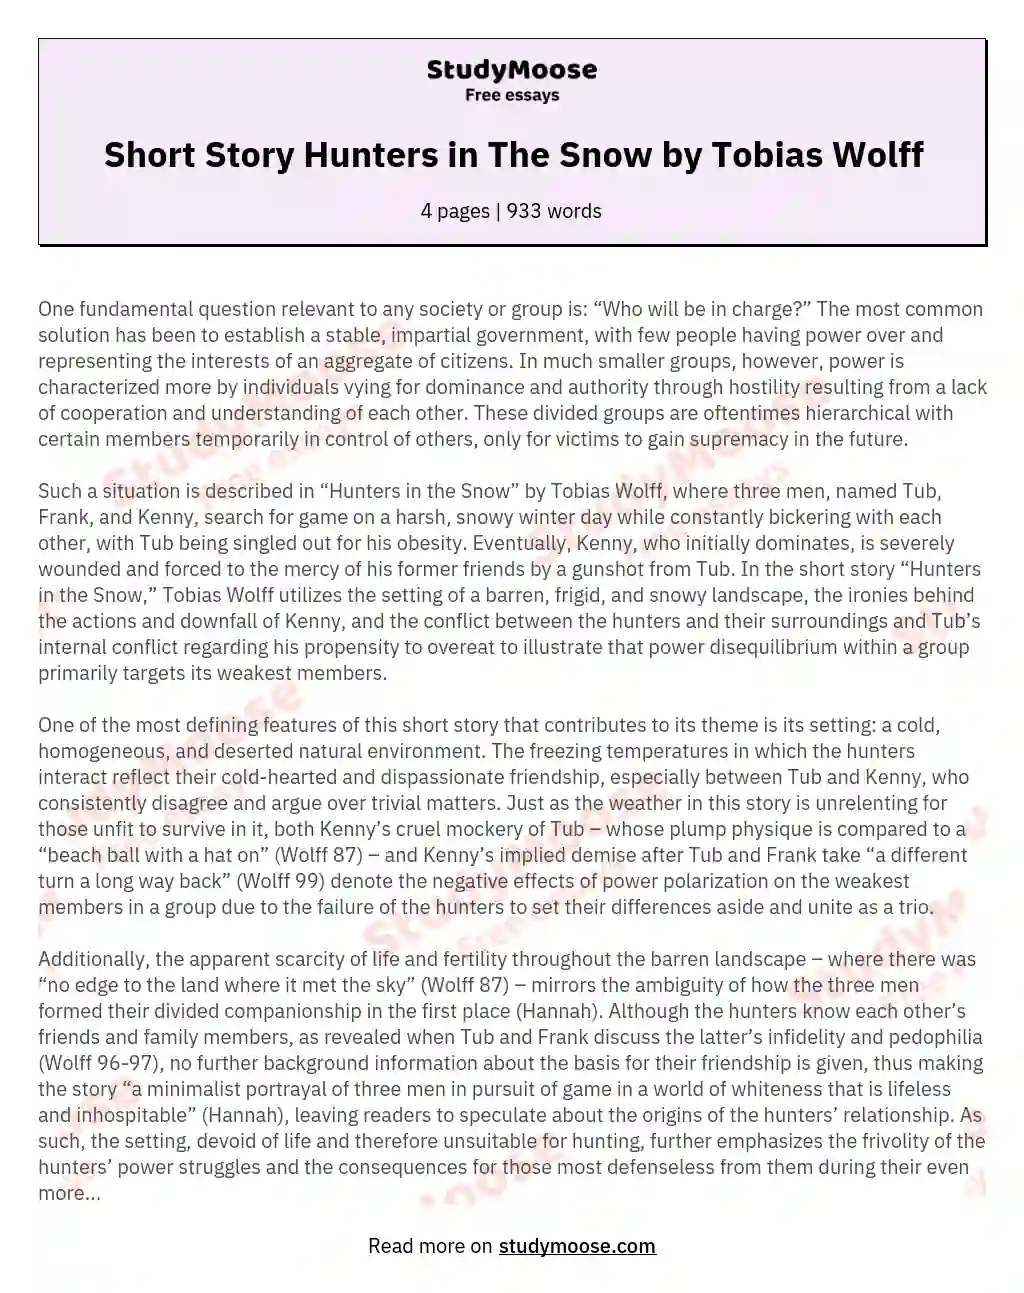 Short Story Hunters in The Snow by Tobias Wolff essay